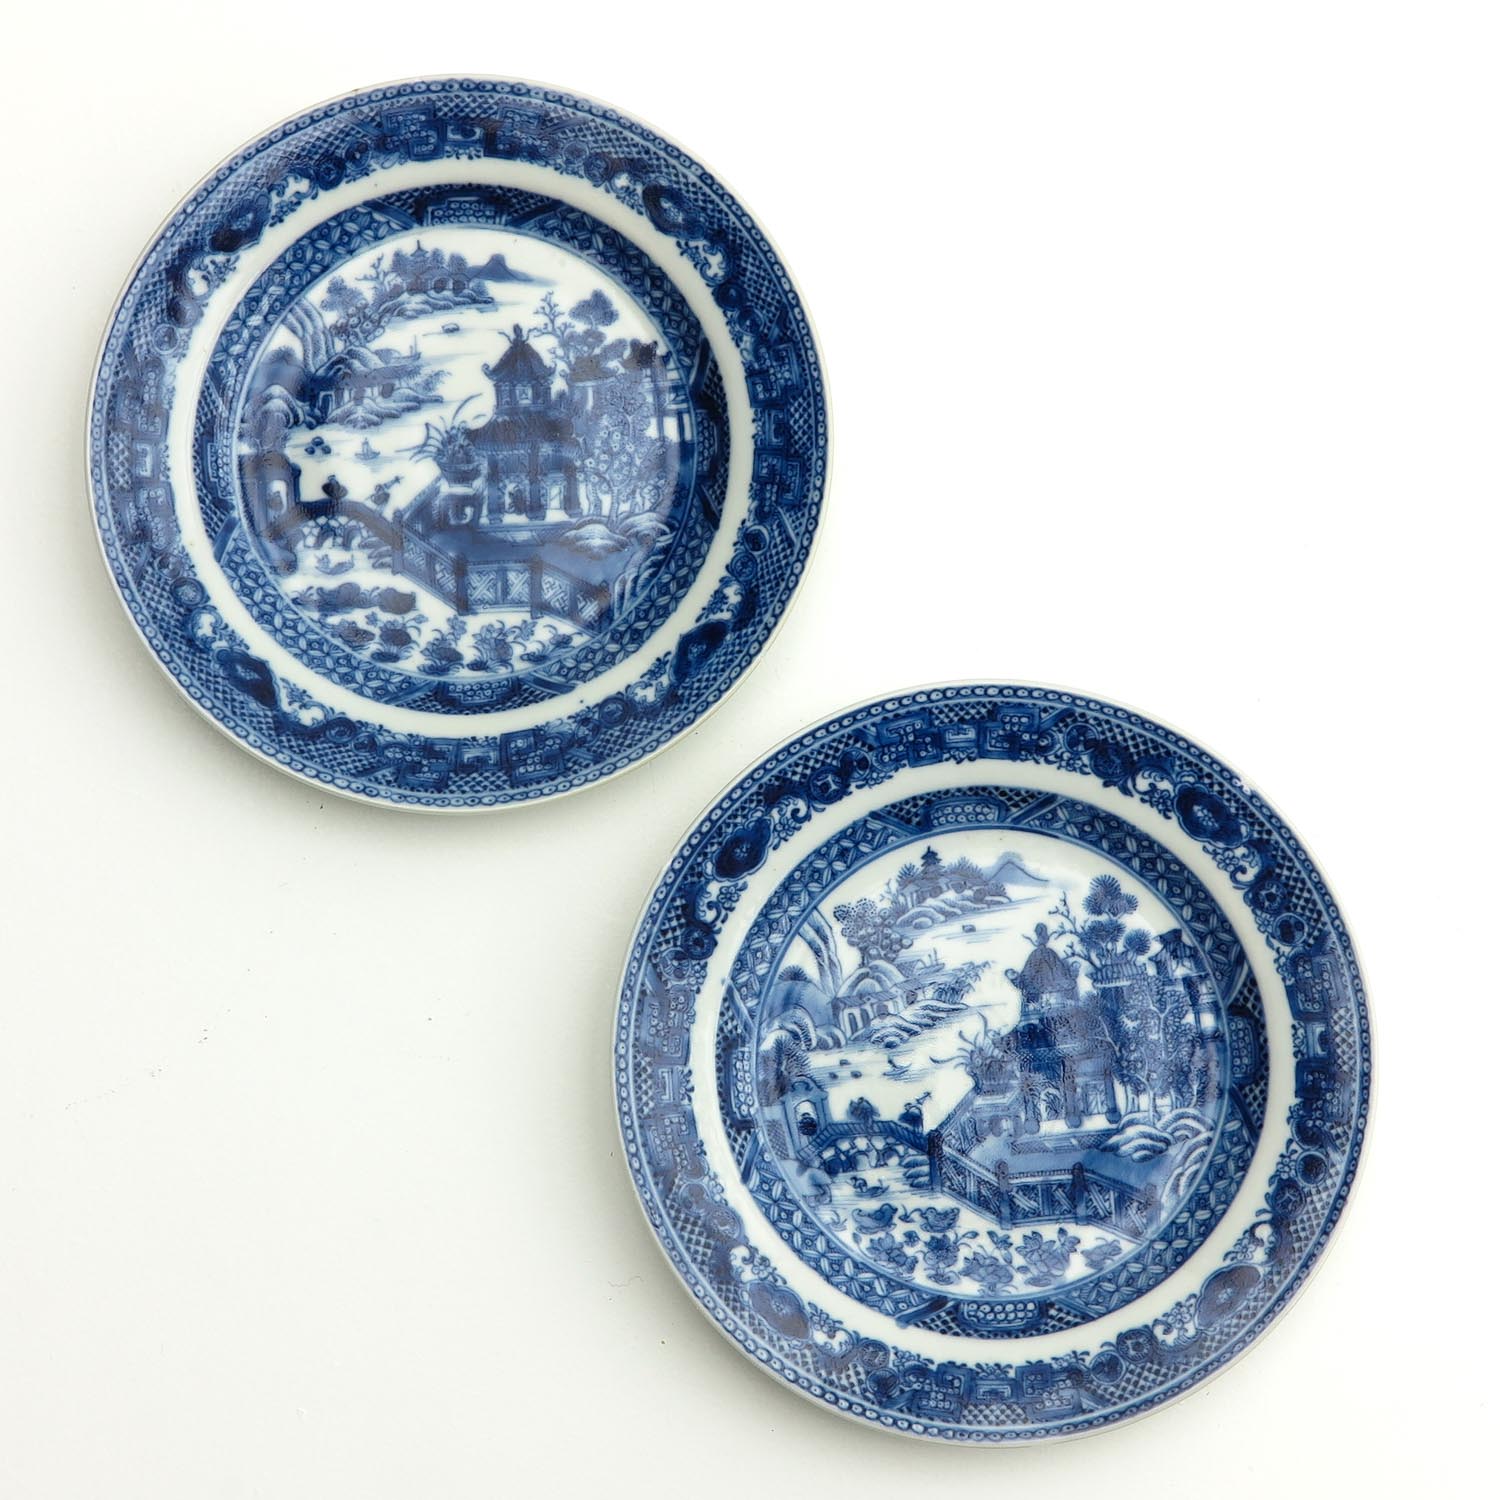 A Series of 5 Blue and White Plates - Image 5 of 9